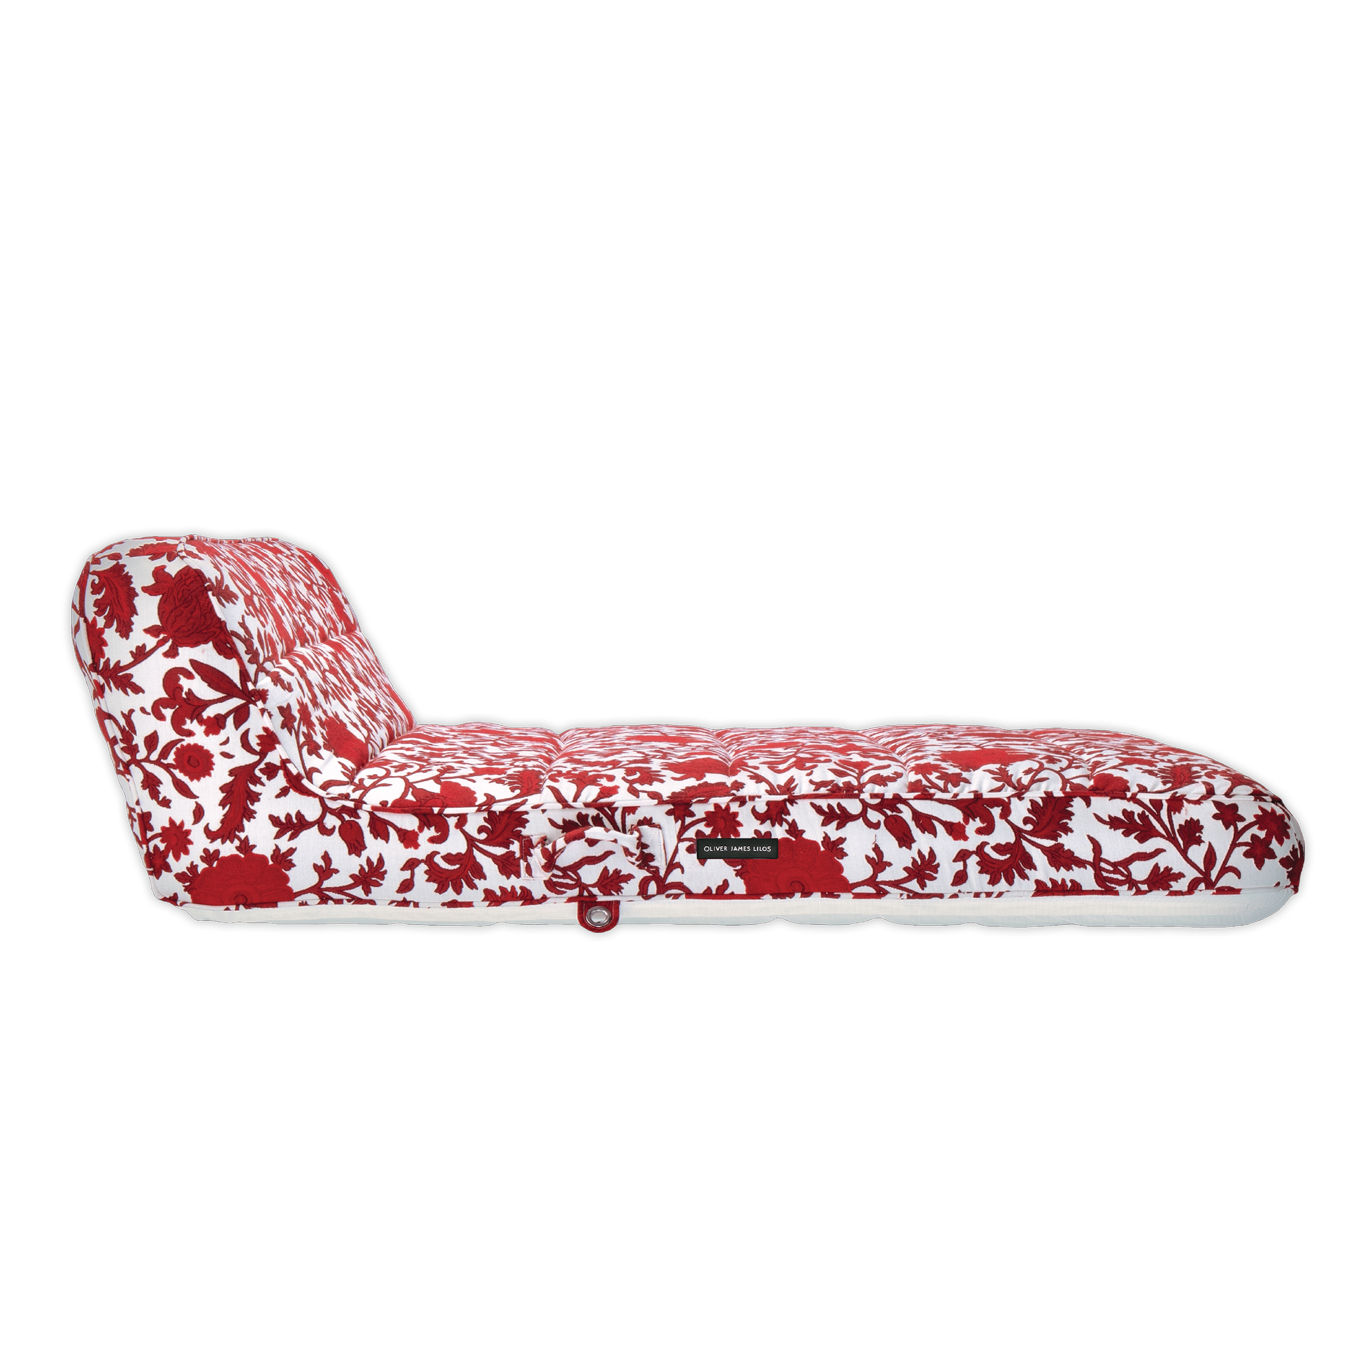 A cut-out image of a luxury pool float upholstered in red and white fabric.